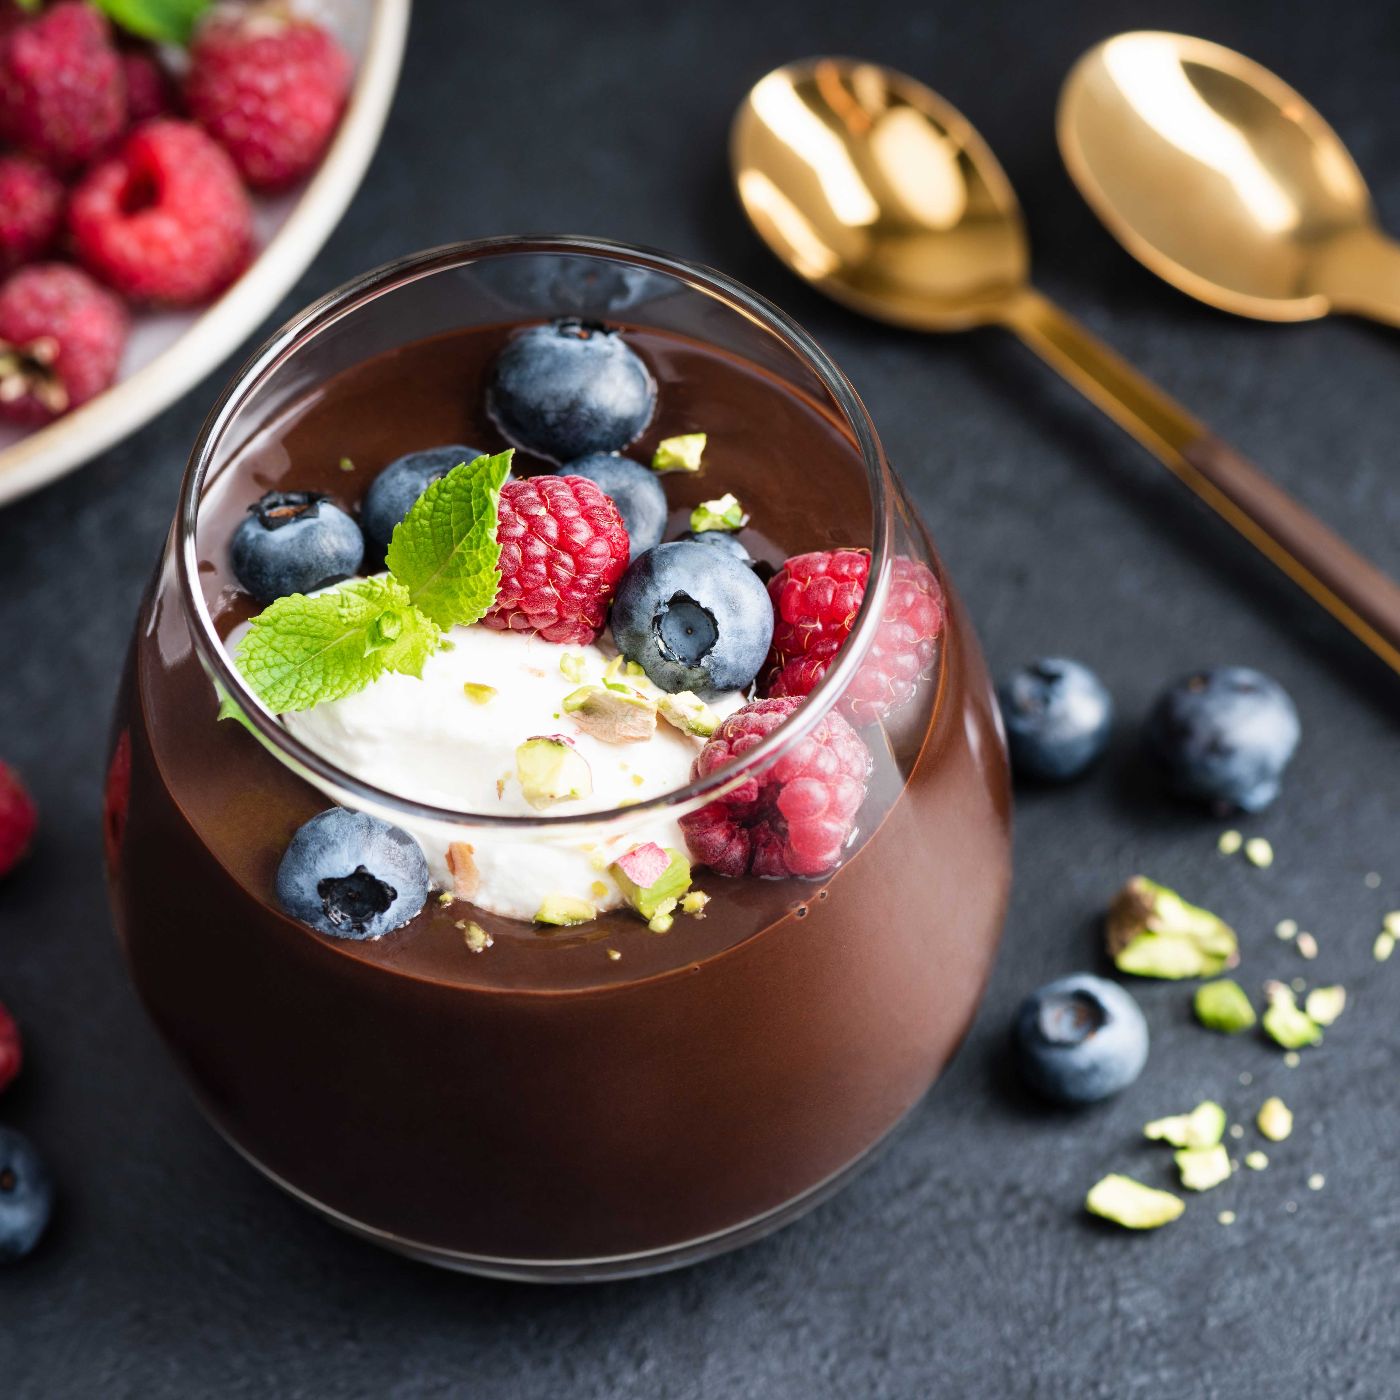 Dark-chocolate-mousse-with-berries-and-cream-1332130301_7360x4912_square.jpeg